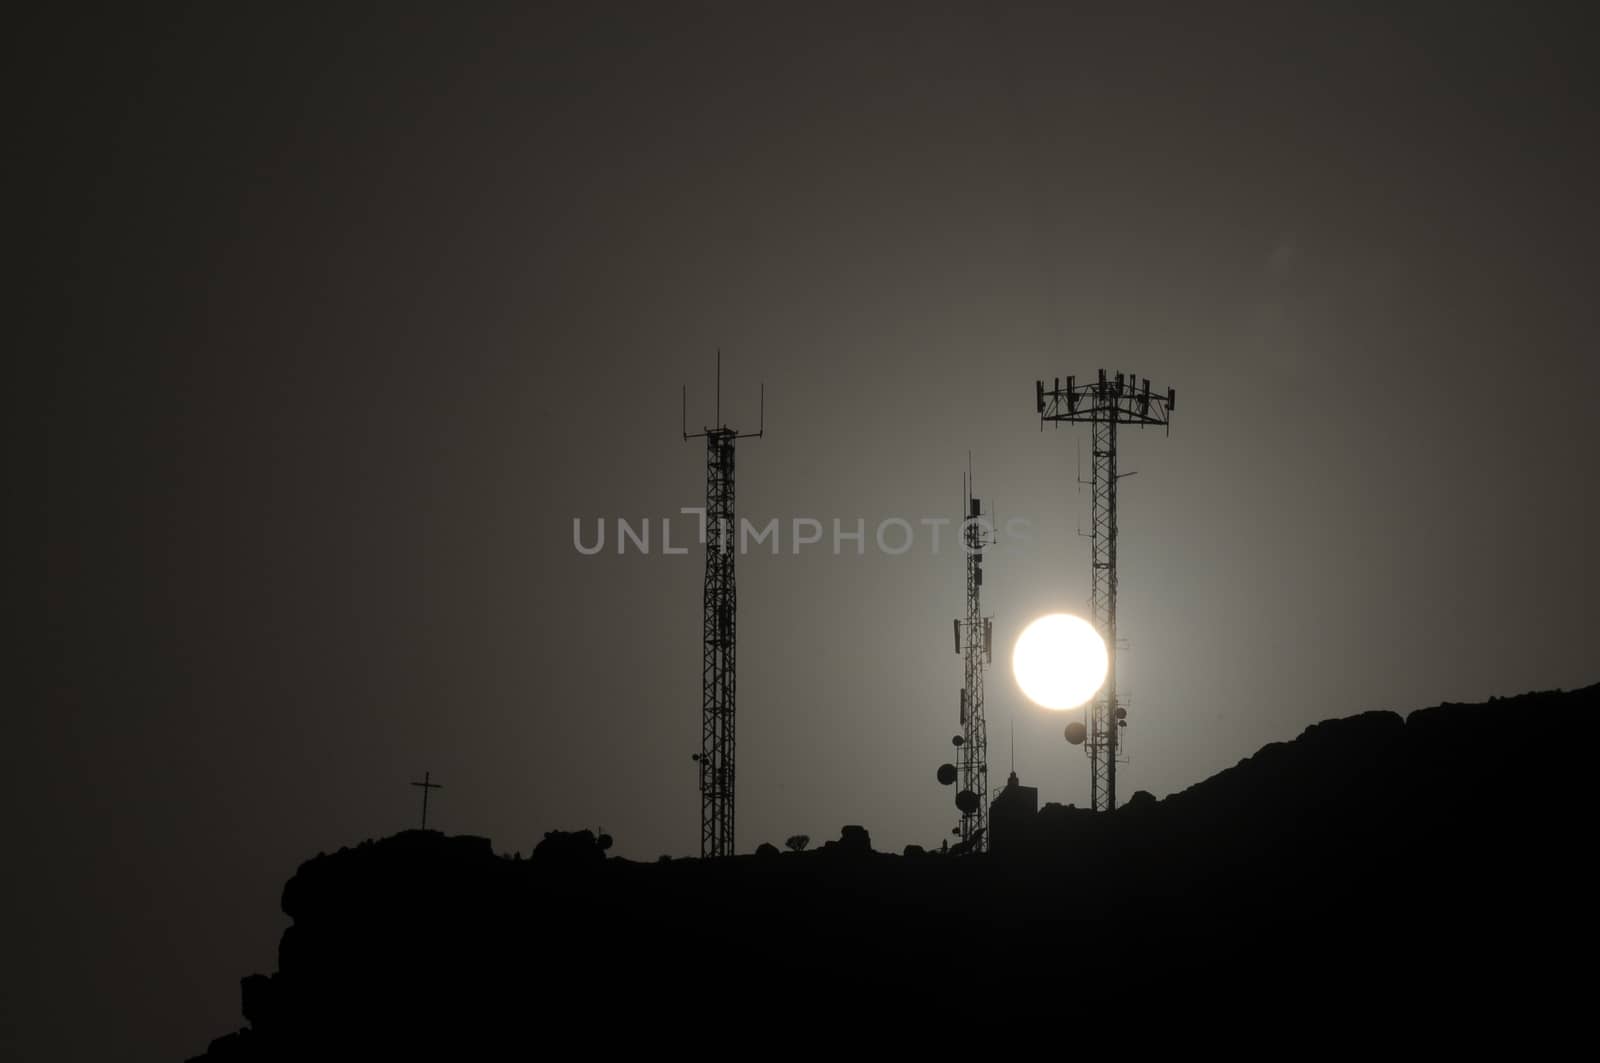 Some Silhouetted Antennas on the top of a Hill